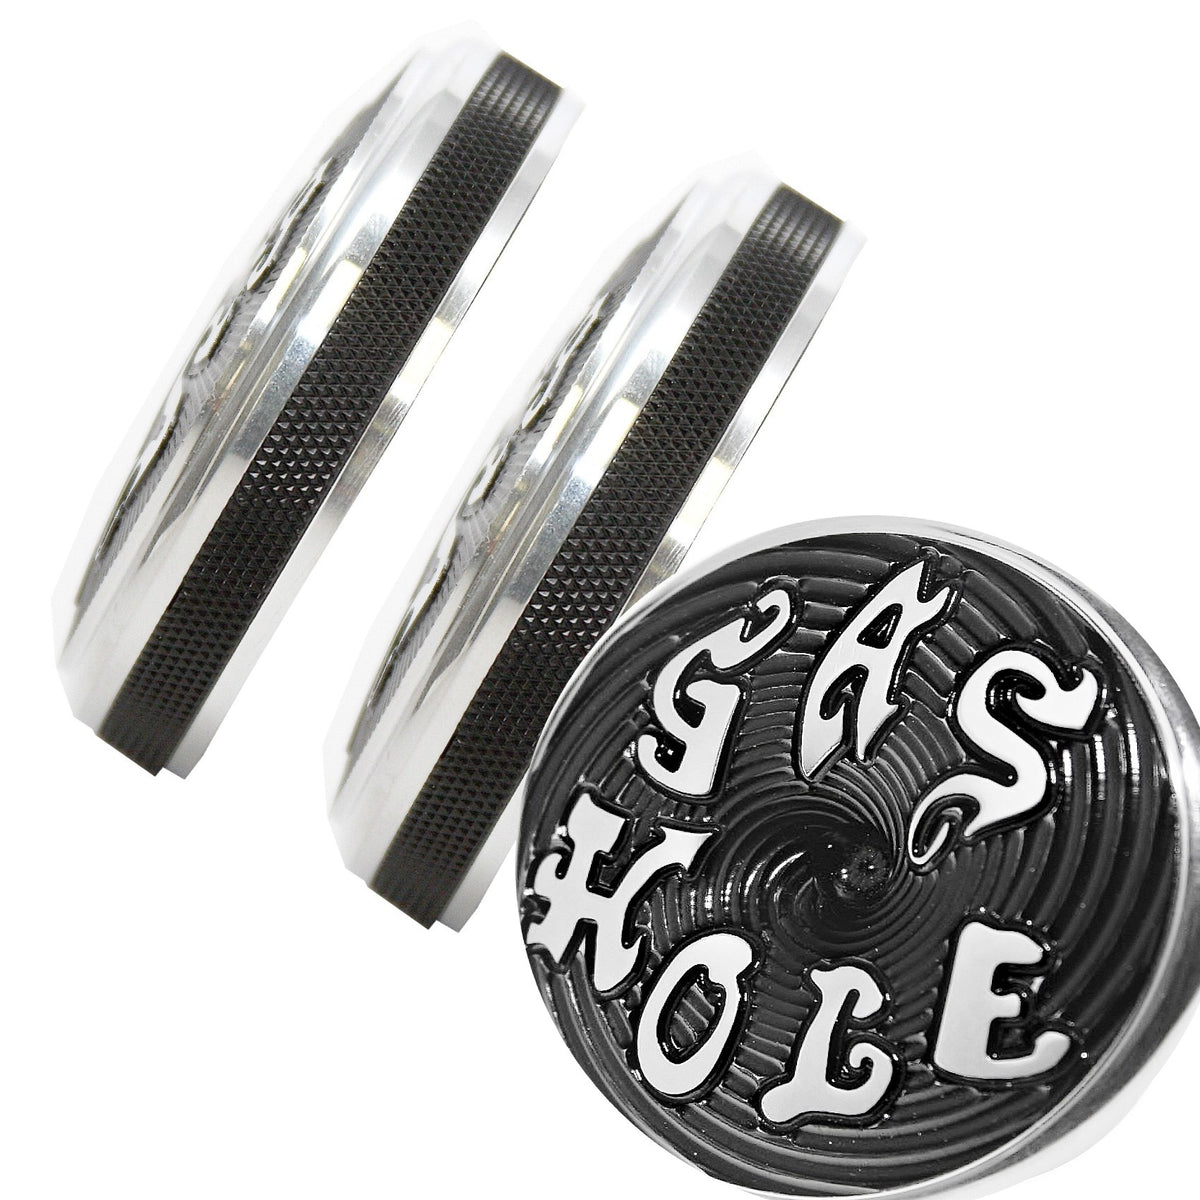 Speed Dealer Customs Gas Cap Set Gas Hole-Series for Harley